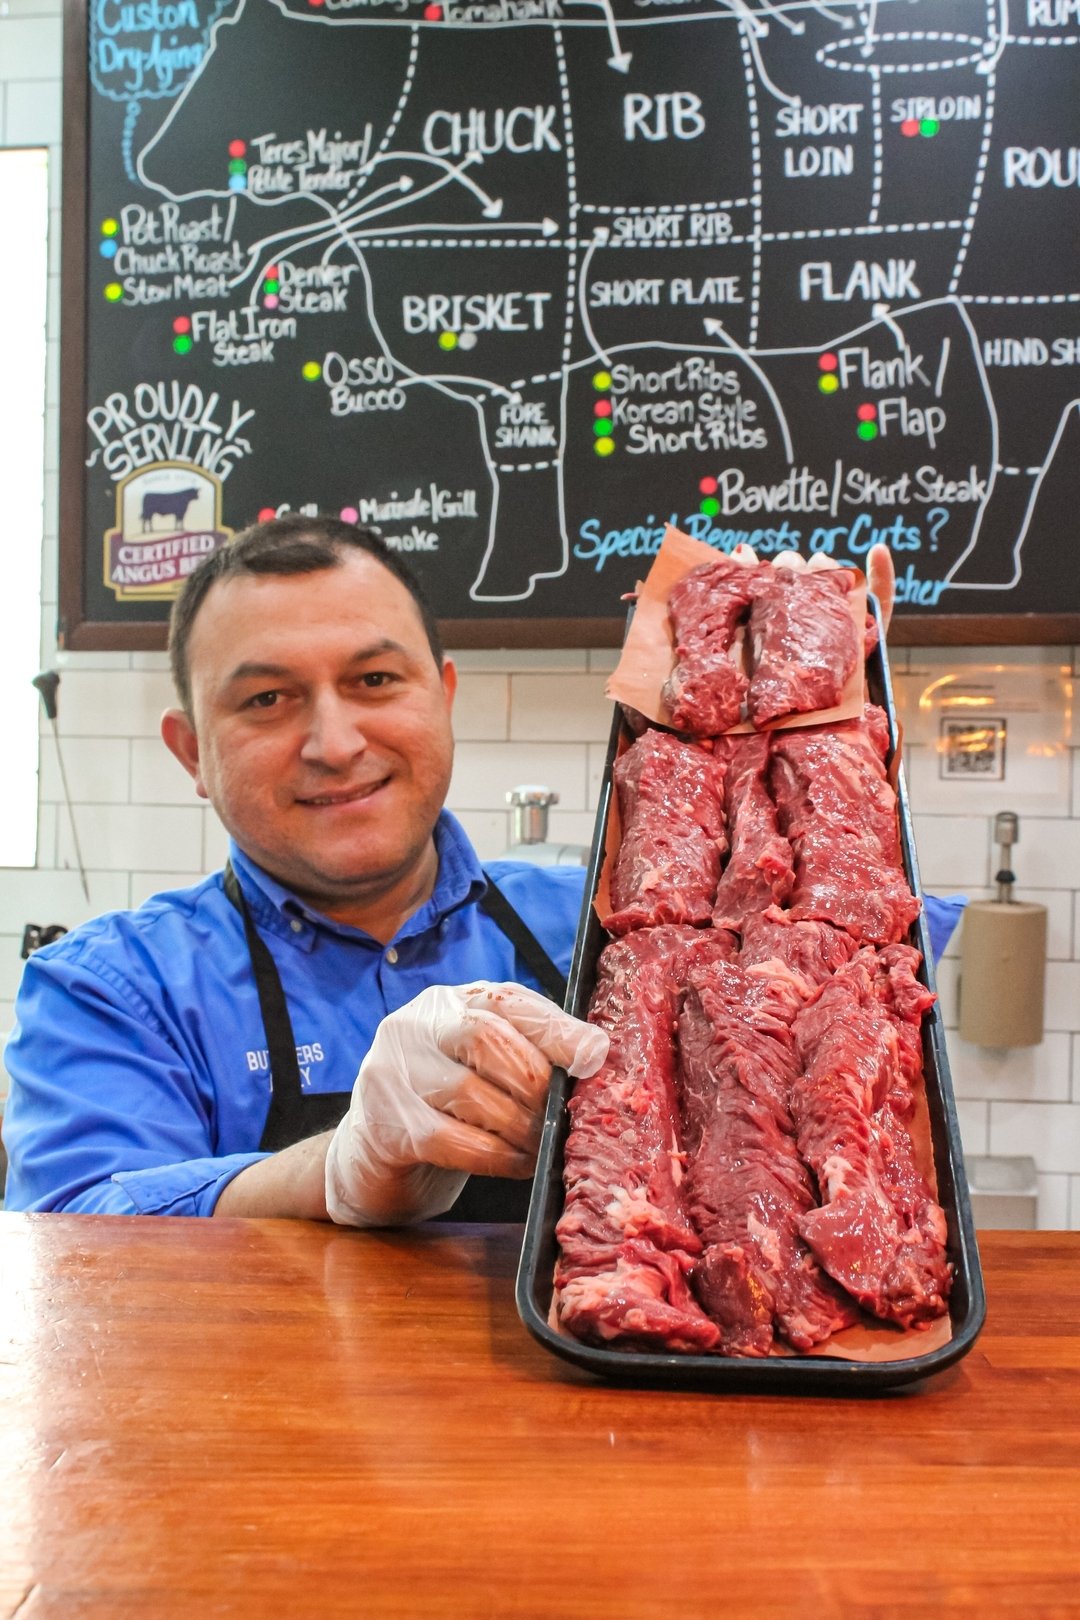 This week Alex has Hanger Steak stocked for you to put on the grill. 

Also known as butcher's steak or hanging tenderloin, hanger steak is a flavorful cut of beef. This steak&rsquo;s placement is between the loin and ribs. It is rich and beefy. Our 